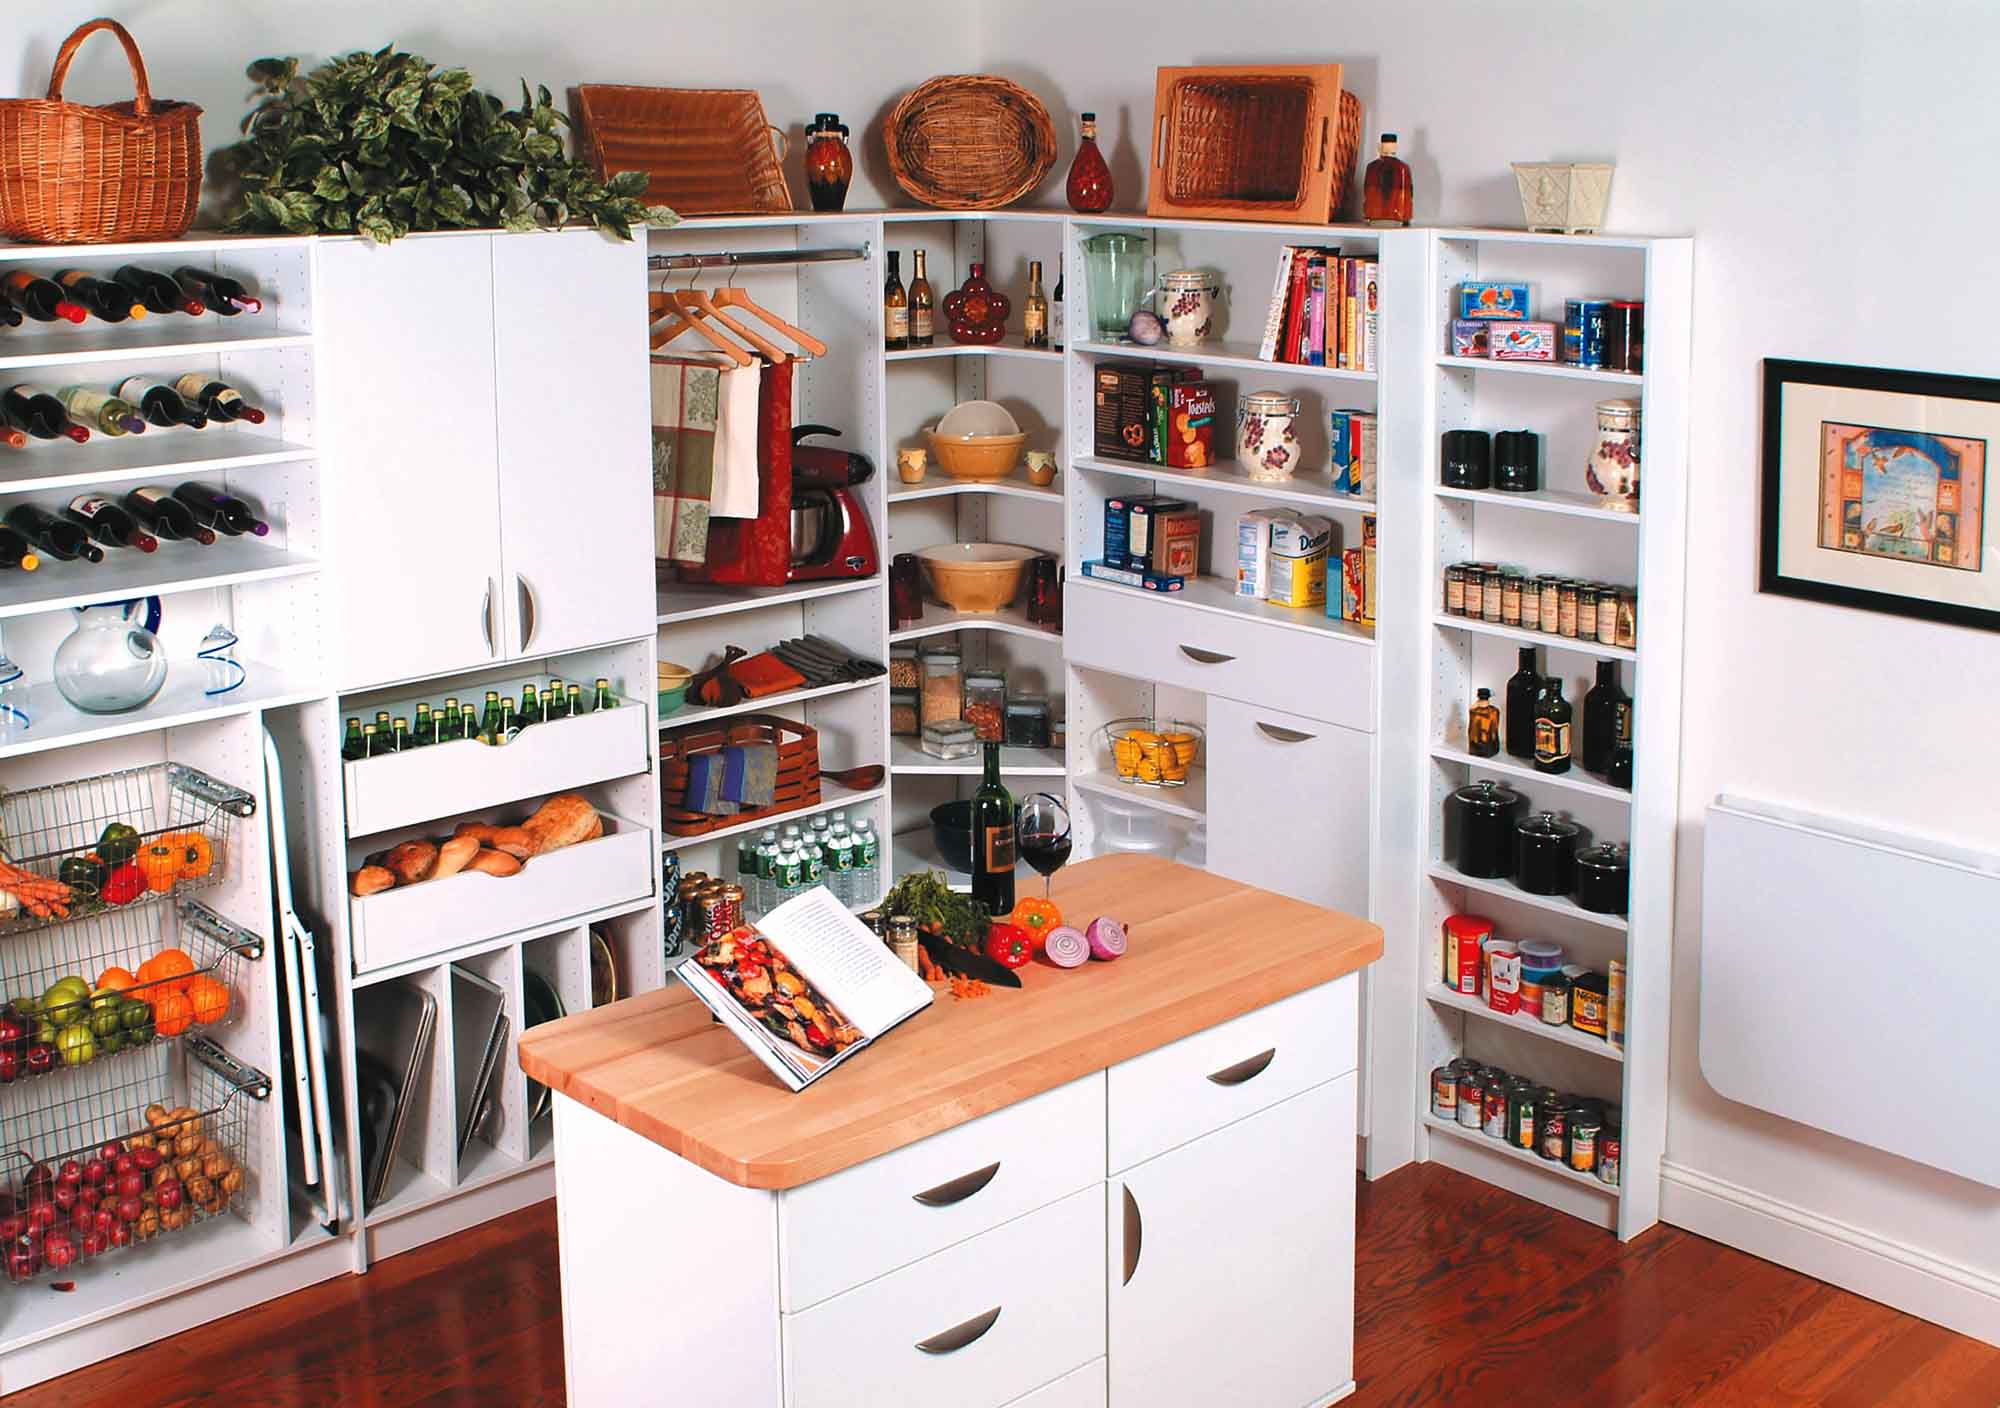 pantry in a kitchen- small kitchen ideas